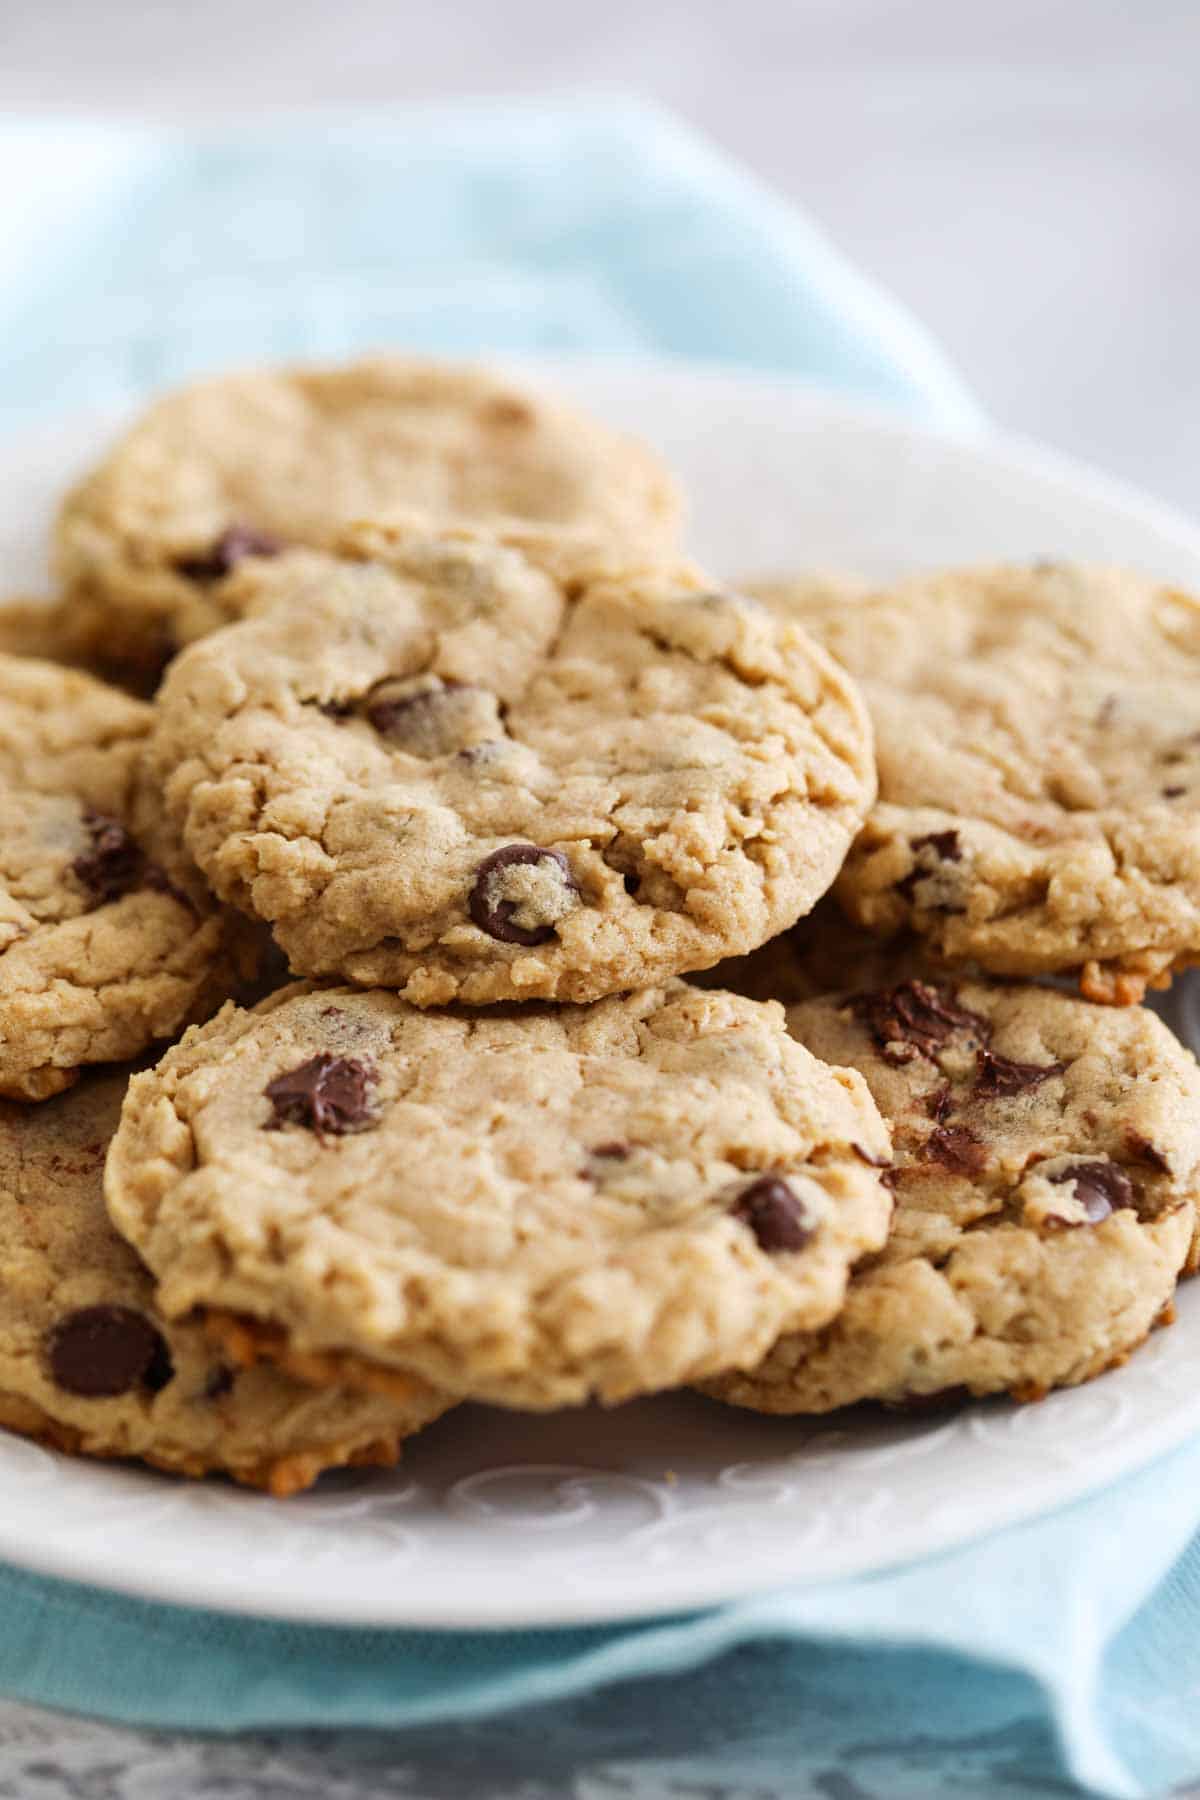 Peanut Butter Oatmeal Cookies with Chocolate Chips on a plate